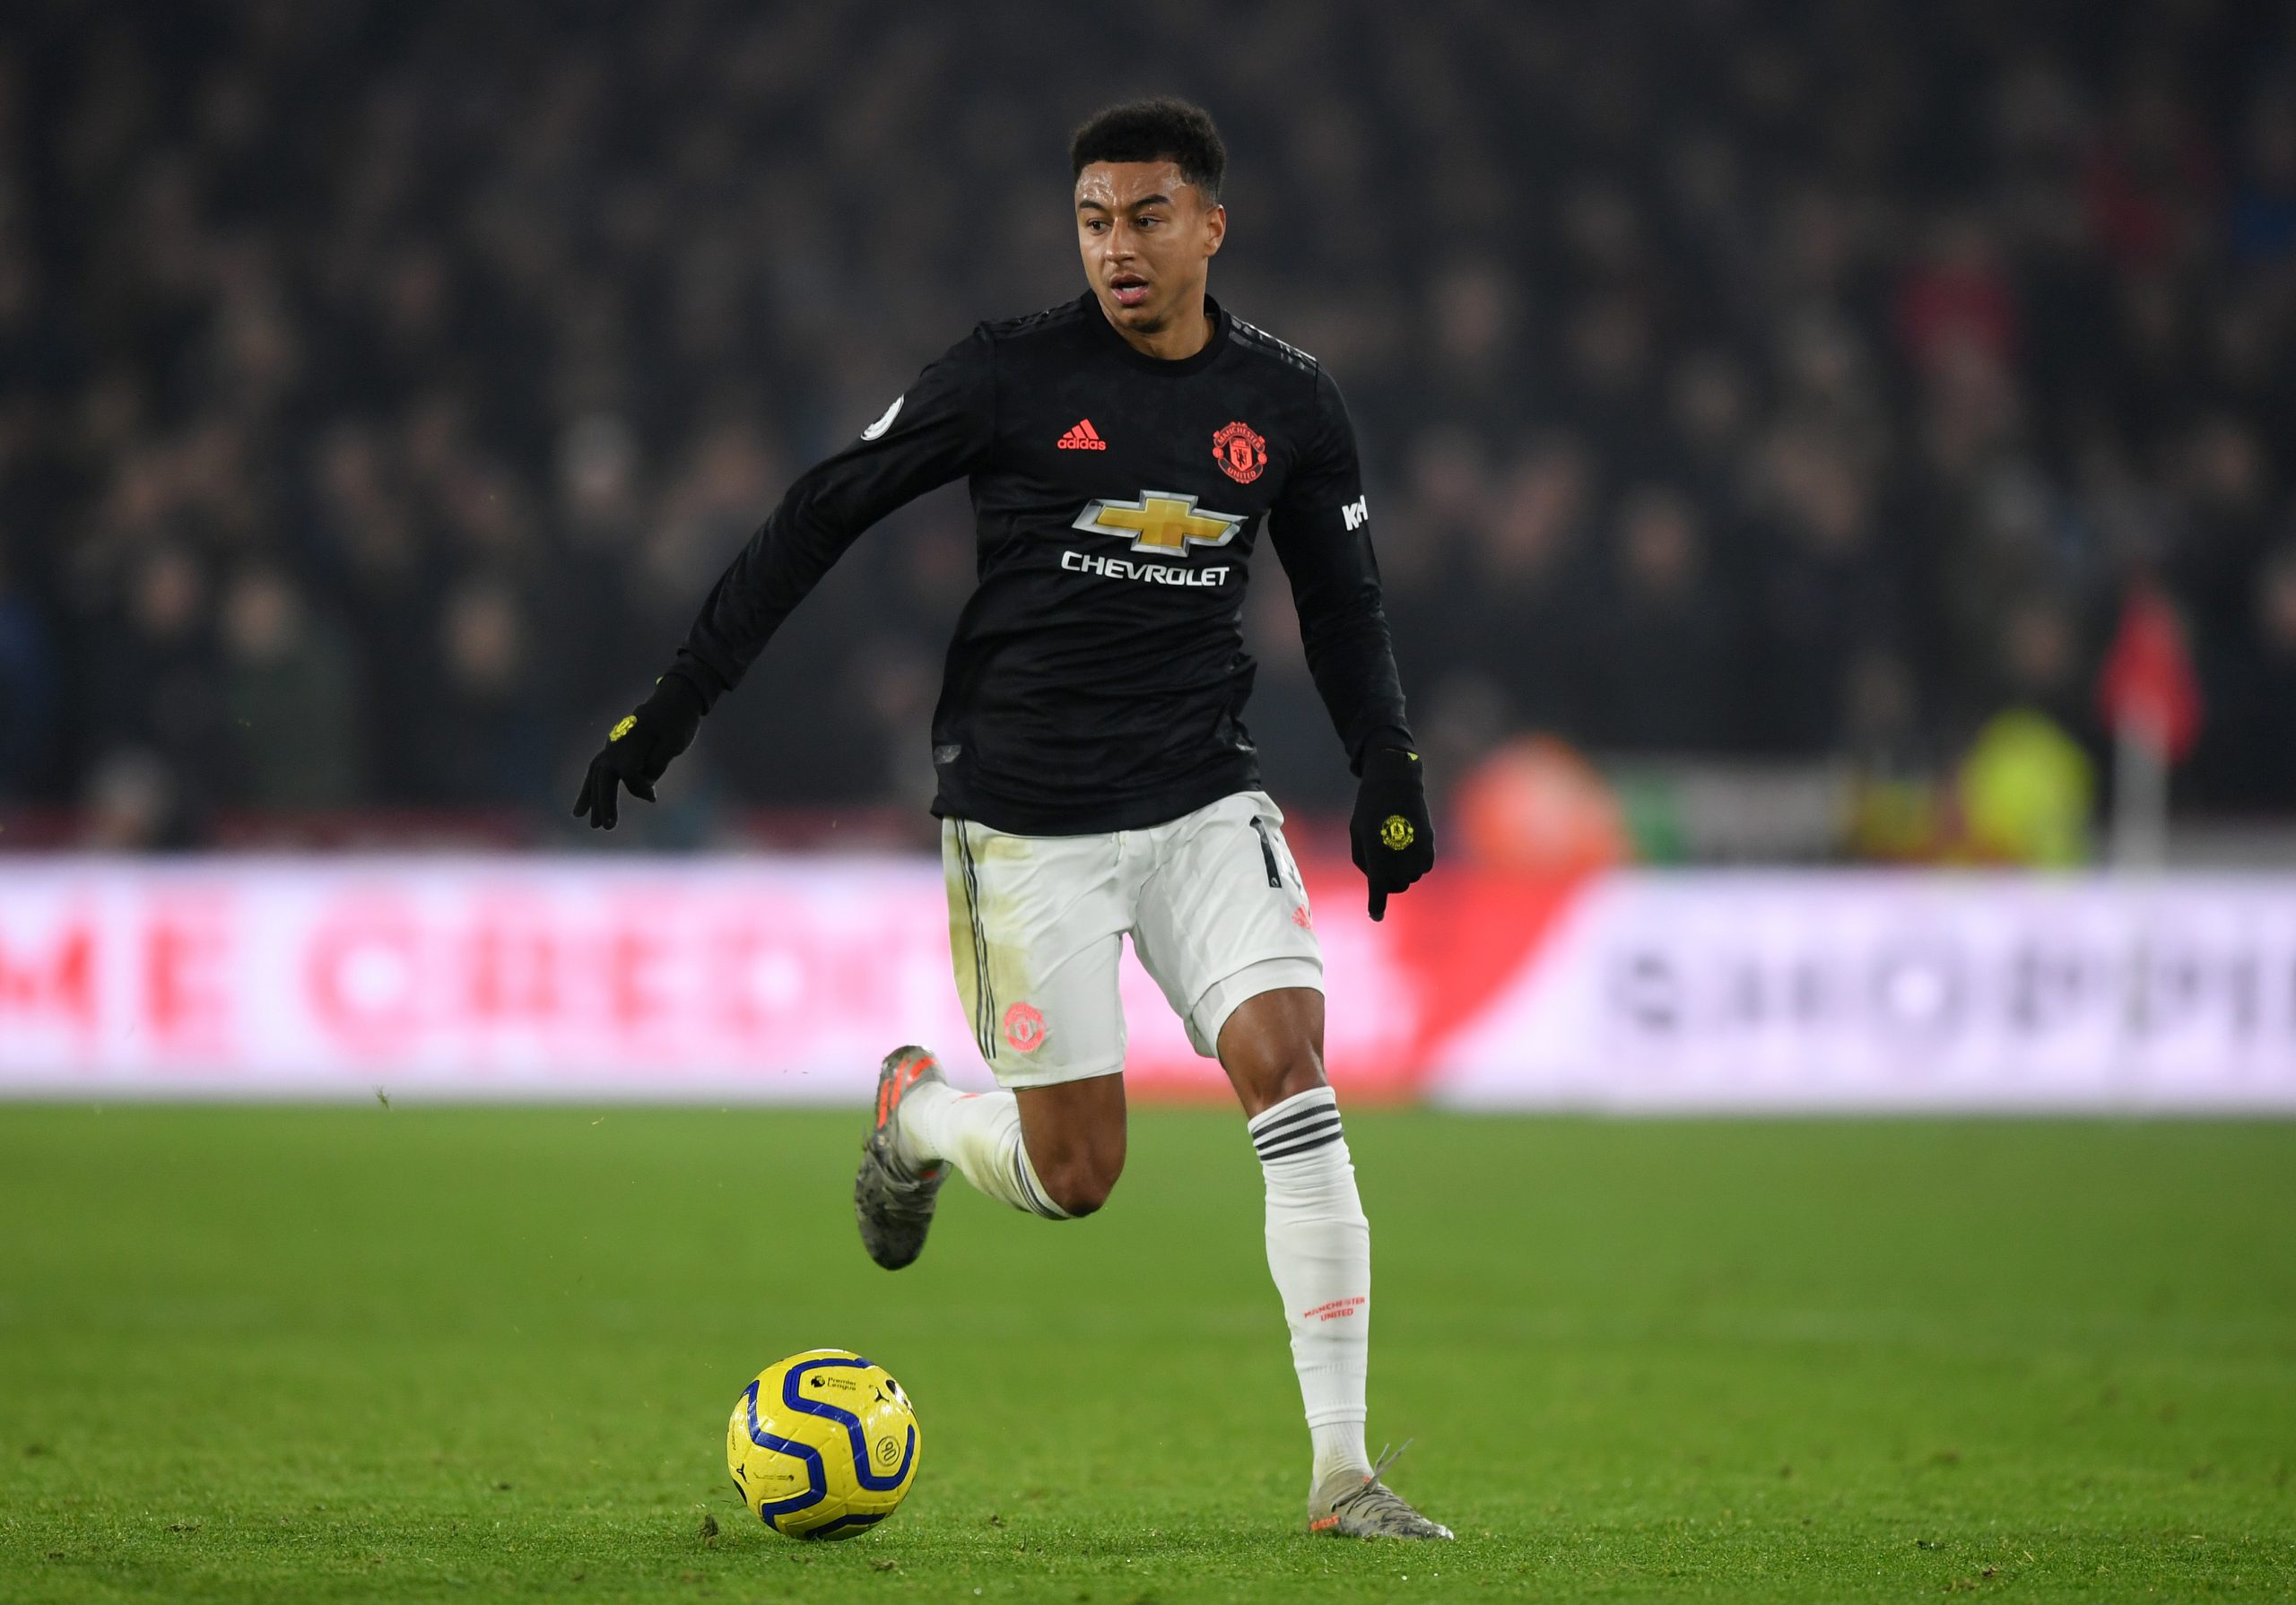 Transfer News: Tottenham Hotspur ahead of the queue to sign Manchester United star Jesse Lingard next summer